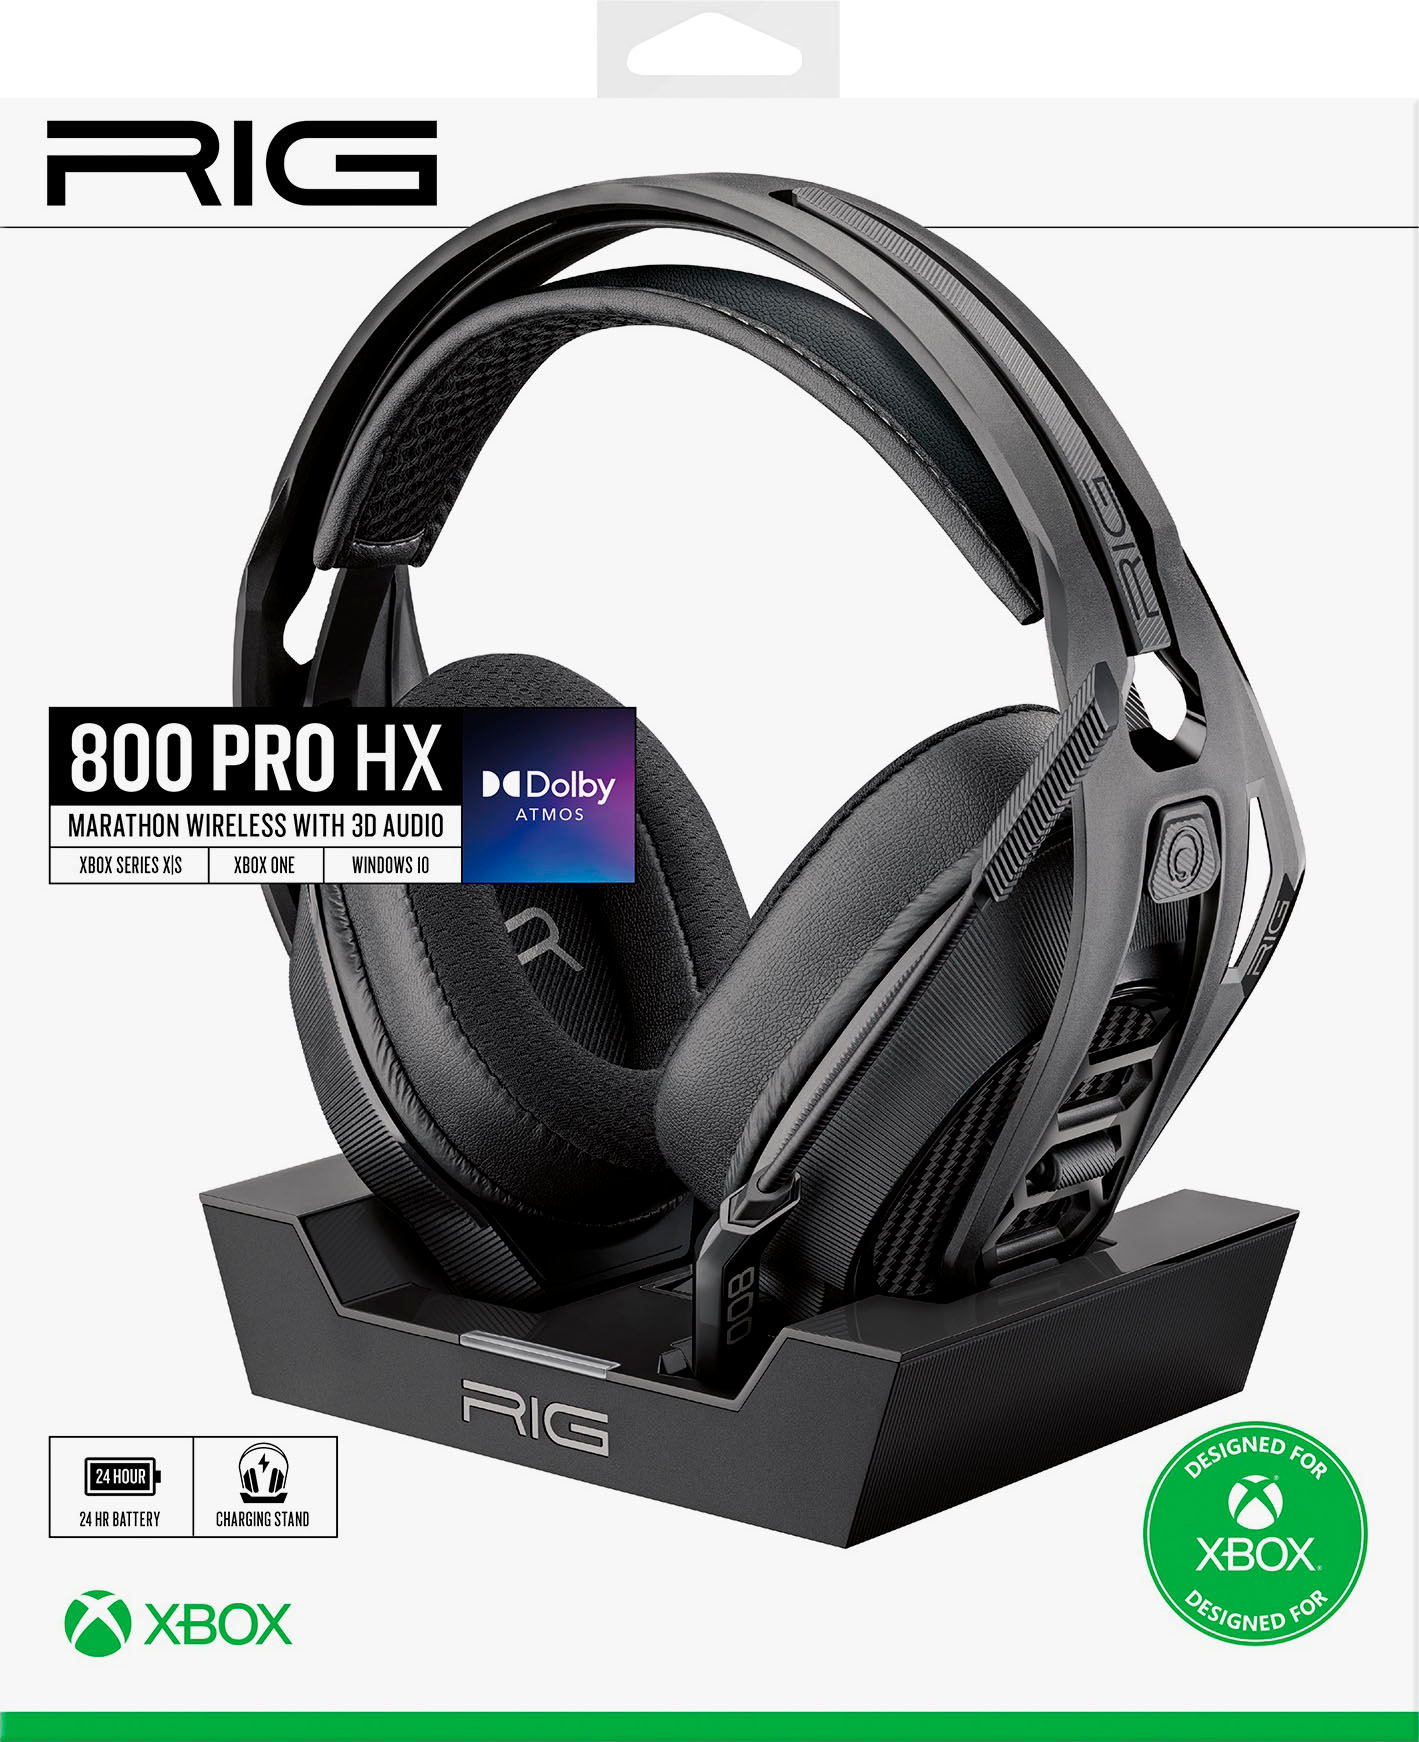 académico Anticuado juguete RIG 800 Pro HX Wireless Headset and Base Station for Xbox Black 10-1172-01  - Best Buy